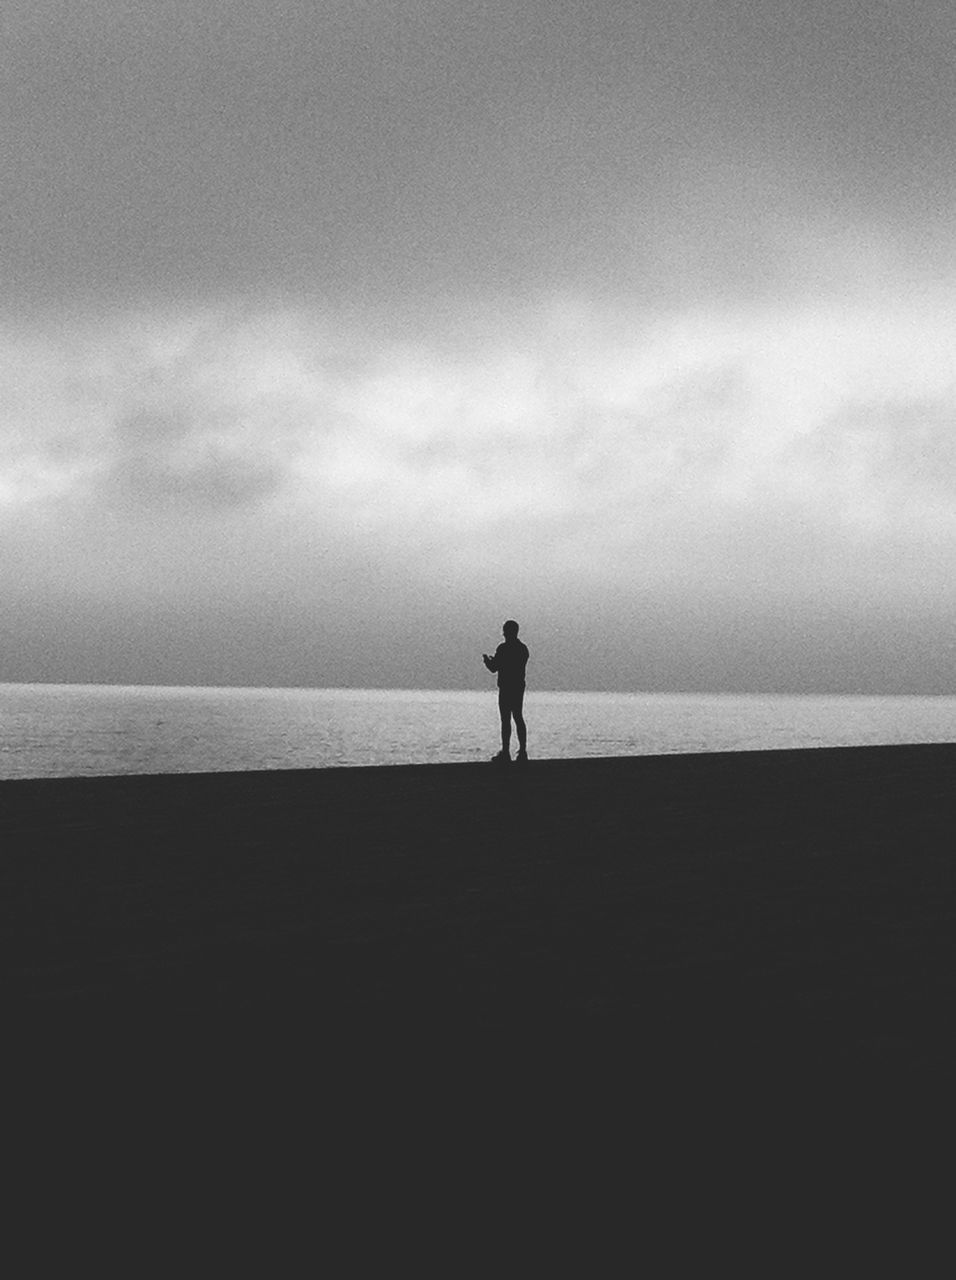 sea, horizon over water, beach, sky, silhouette, water, tranquil scene, tranquility, scenics, lifestyles, shore, standing, full length, leisure activity, men, rear view, beauty in nature, walking